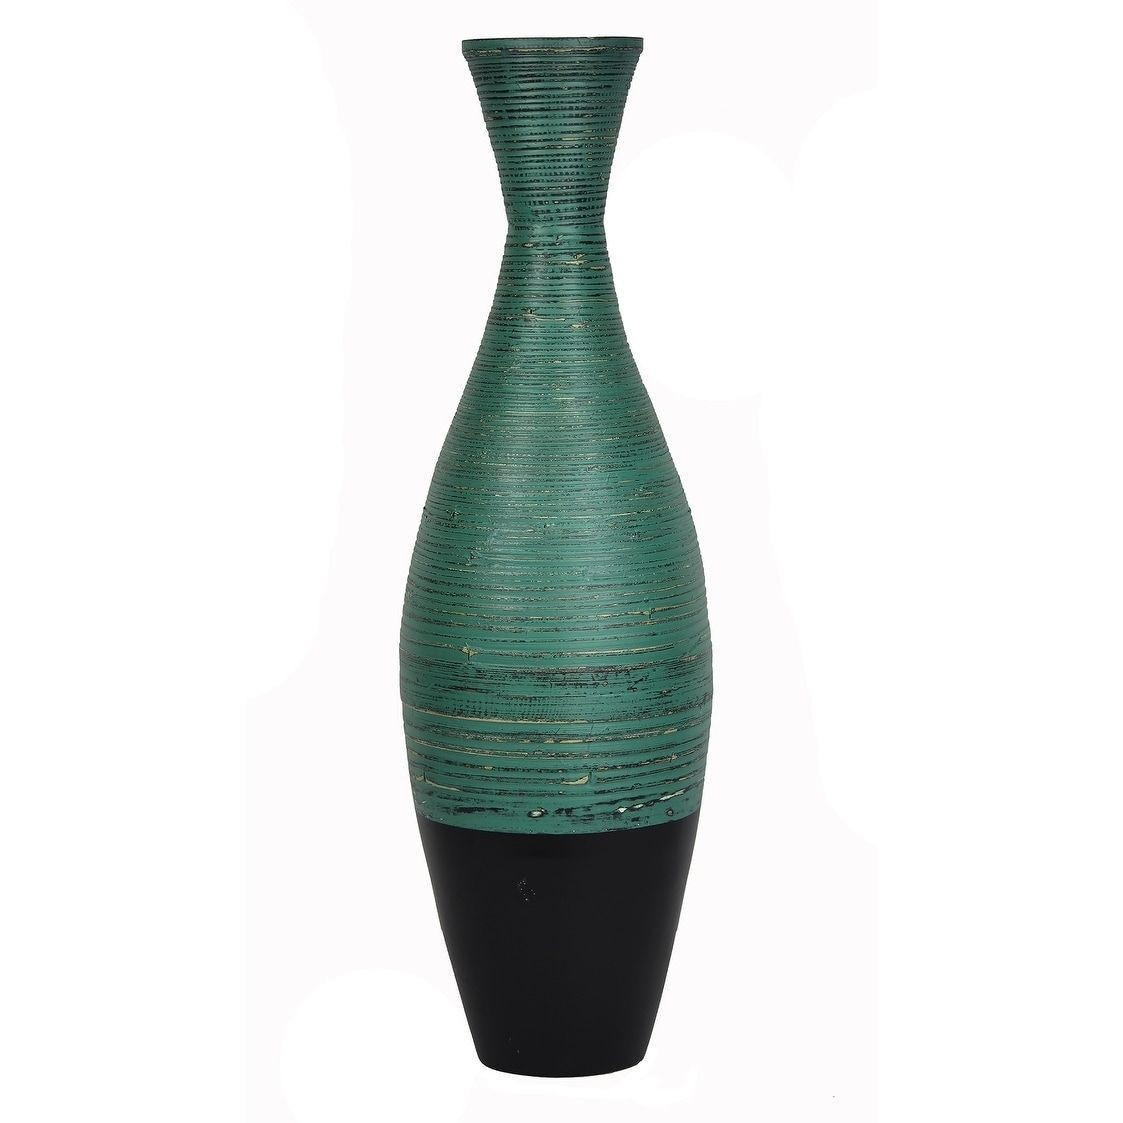 26 Wonderful Red Bamboo Floor Vase 2024 free download red bamboo floor vase of nola 36 spun bamboo floor vase products pinterest outlet with nola 36 spun bamboo floor vase